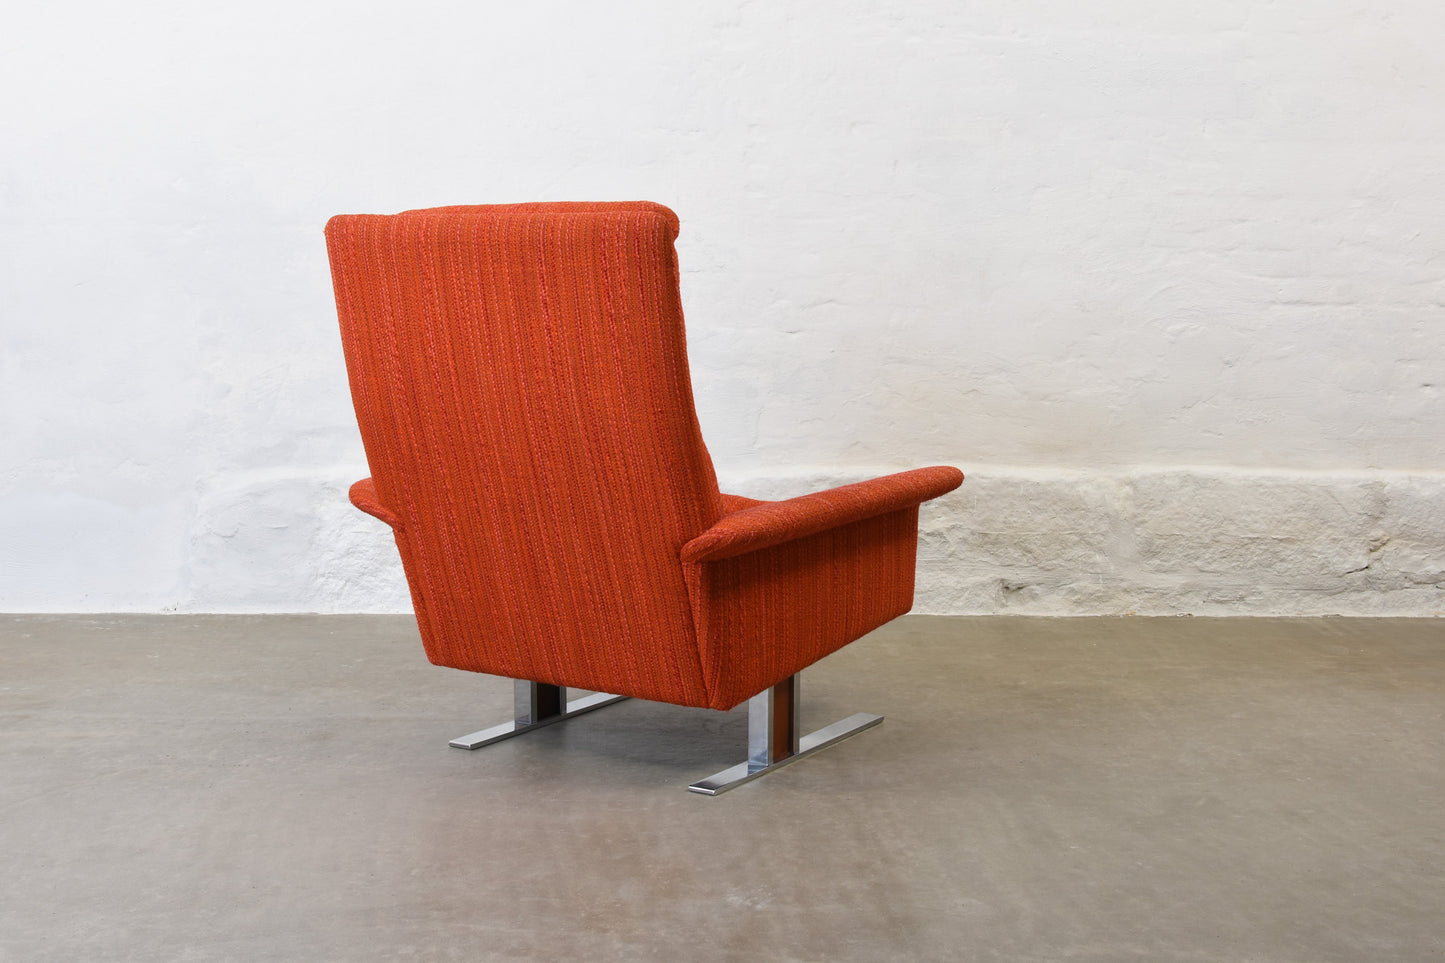 1960s high back lounger by Johannes Andersen